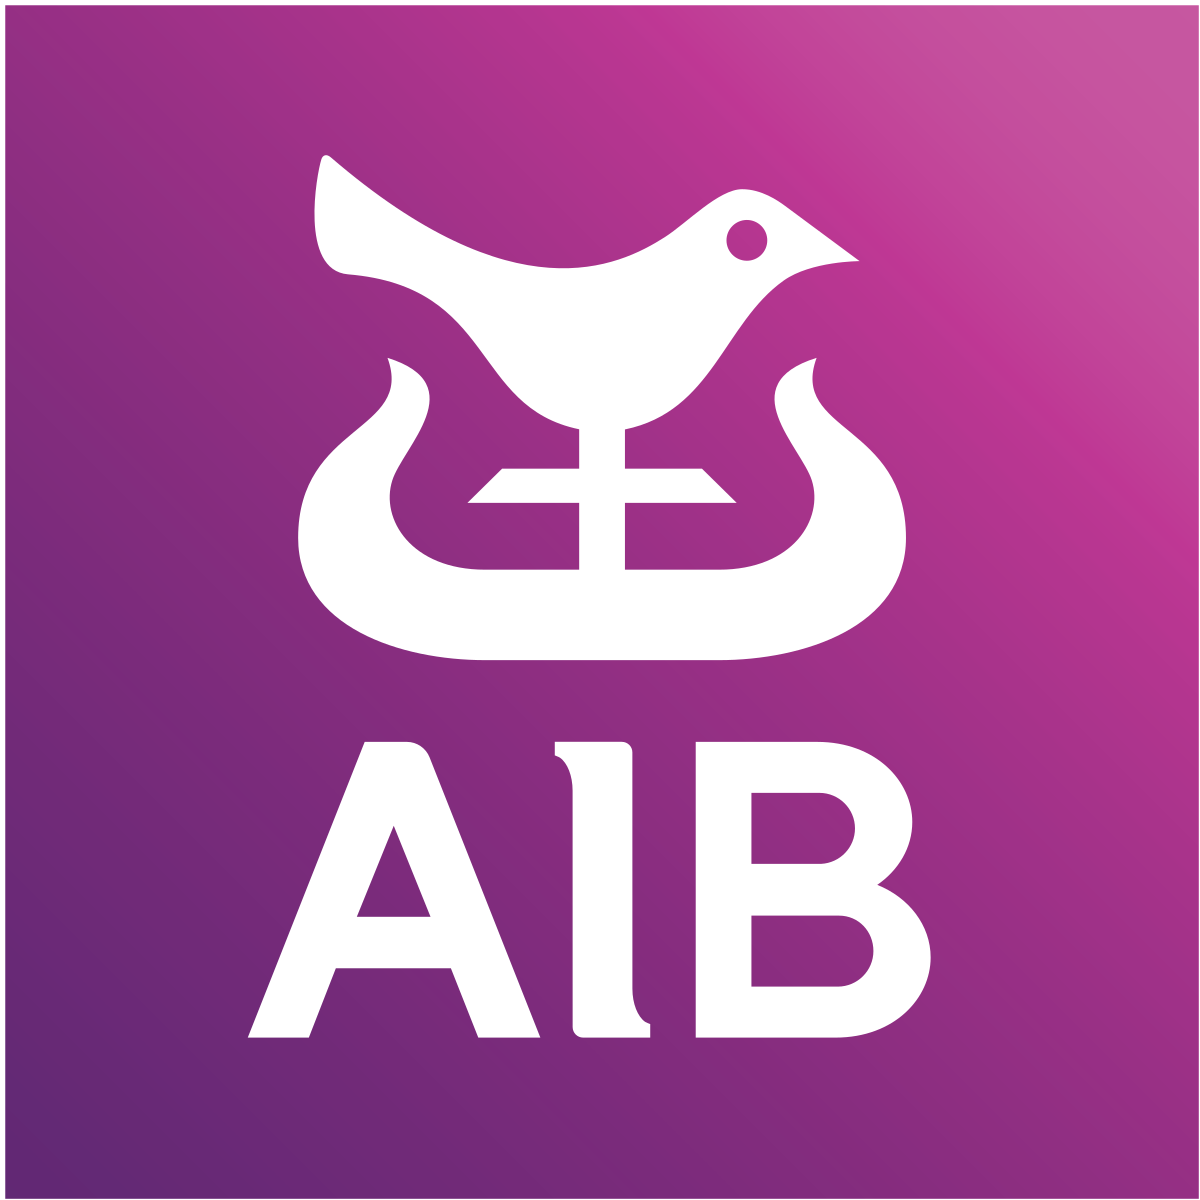 How to buy bitcoin from AIB bank card